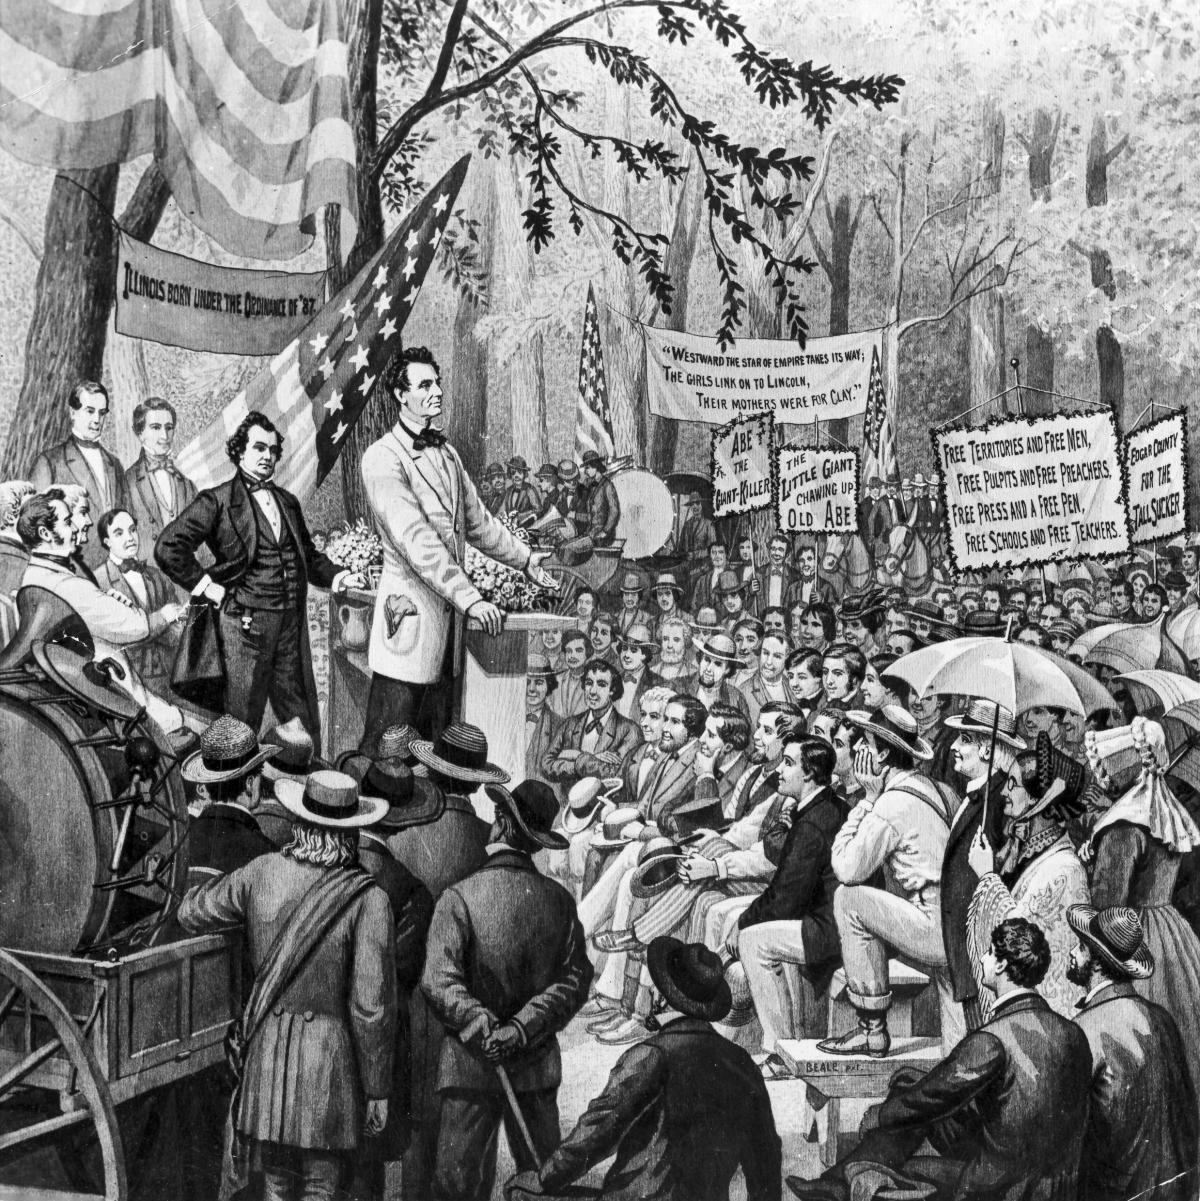 black and white illustration of man talking at a podium, surrounded by crowd of people